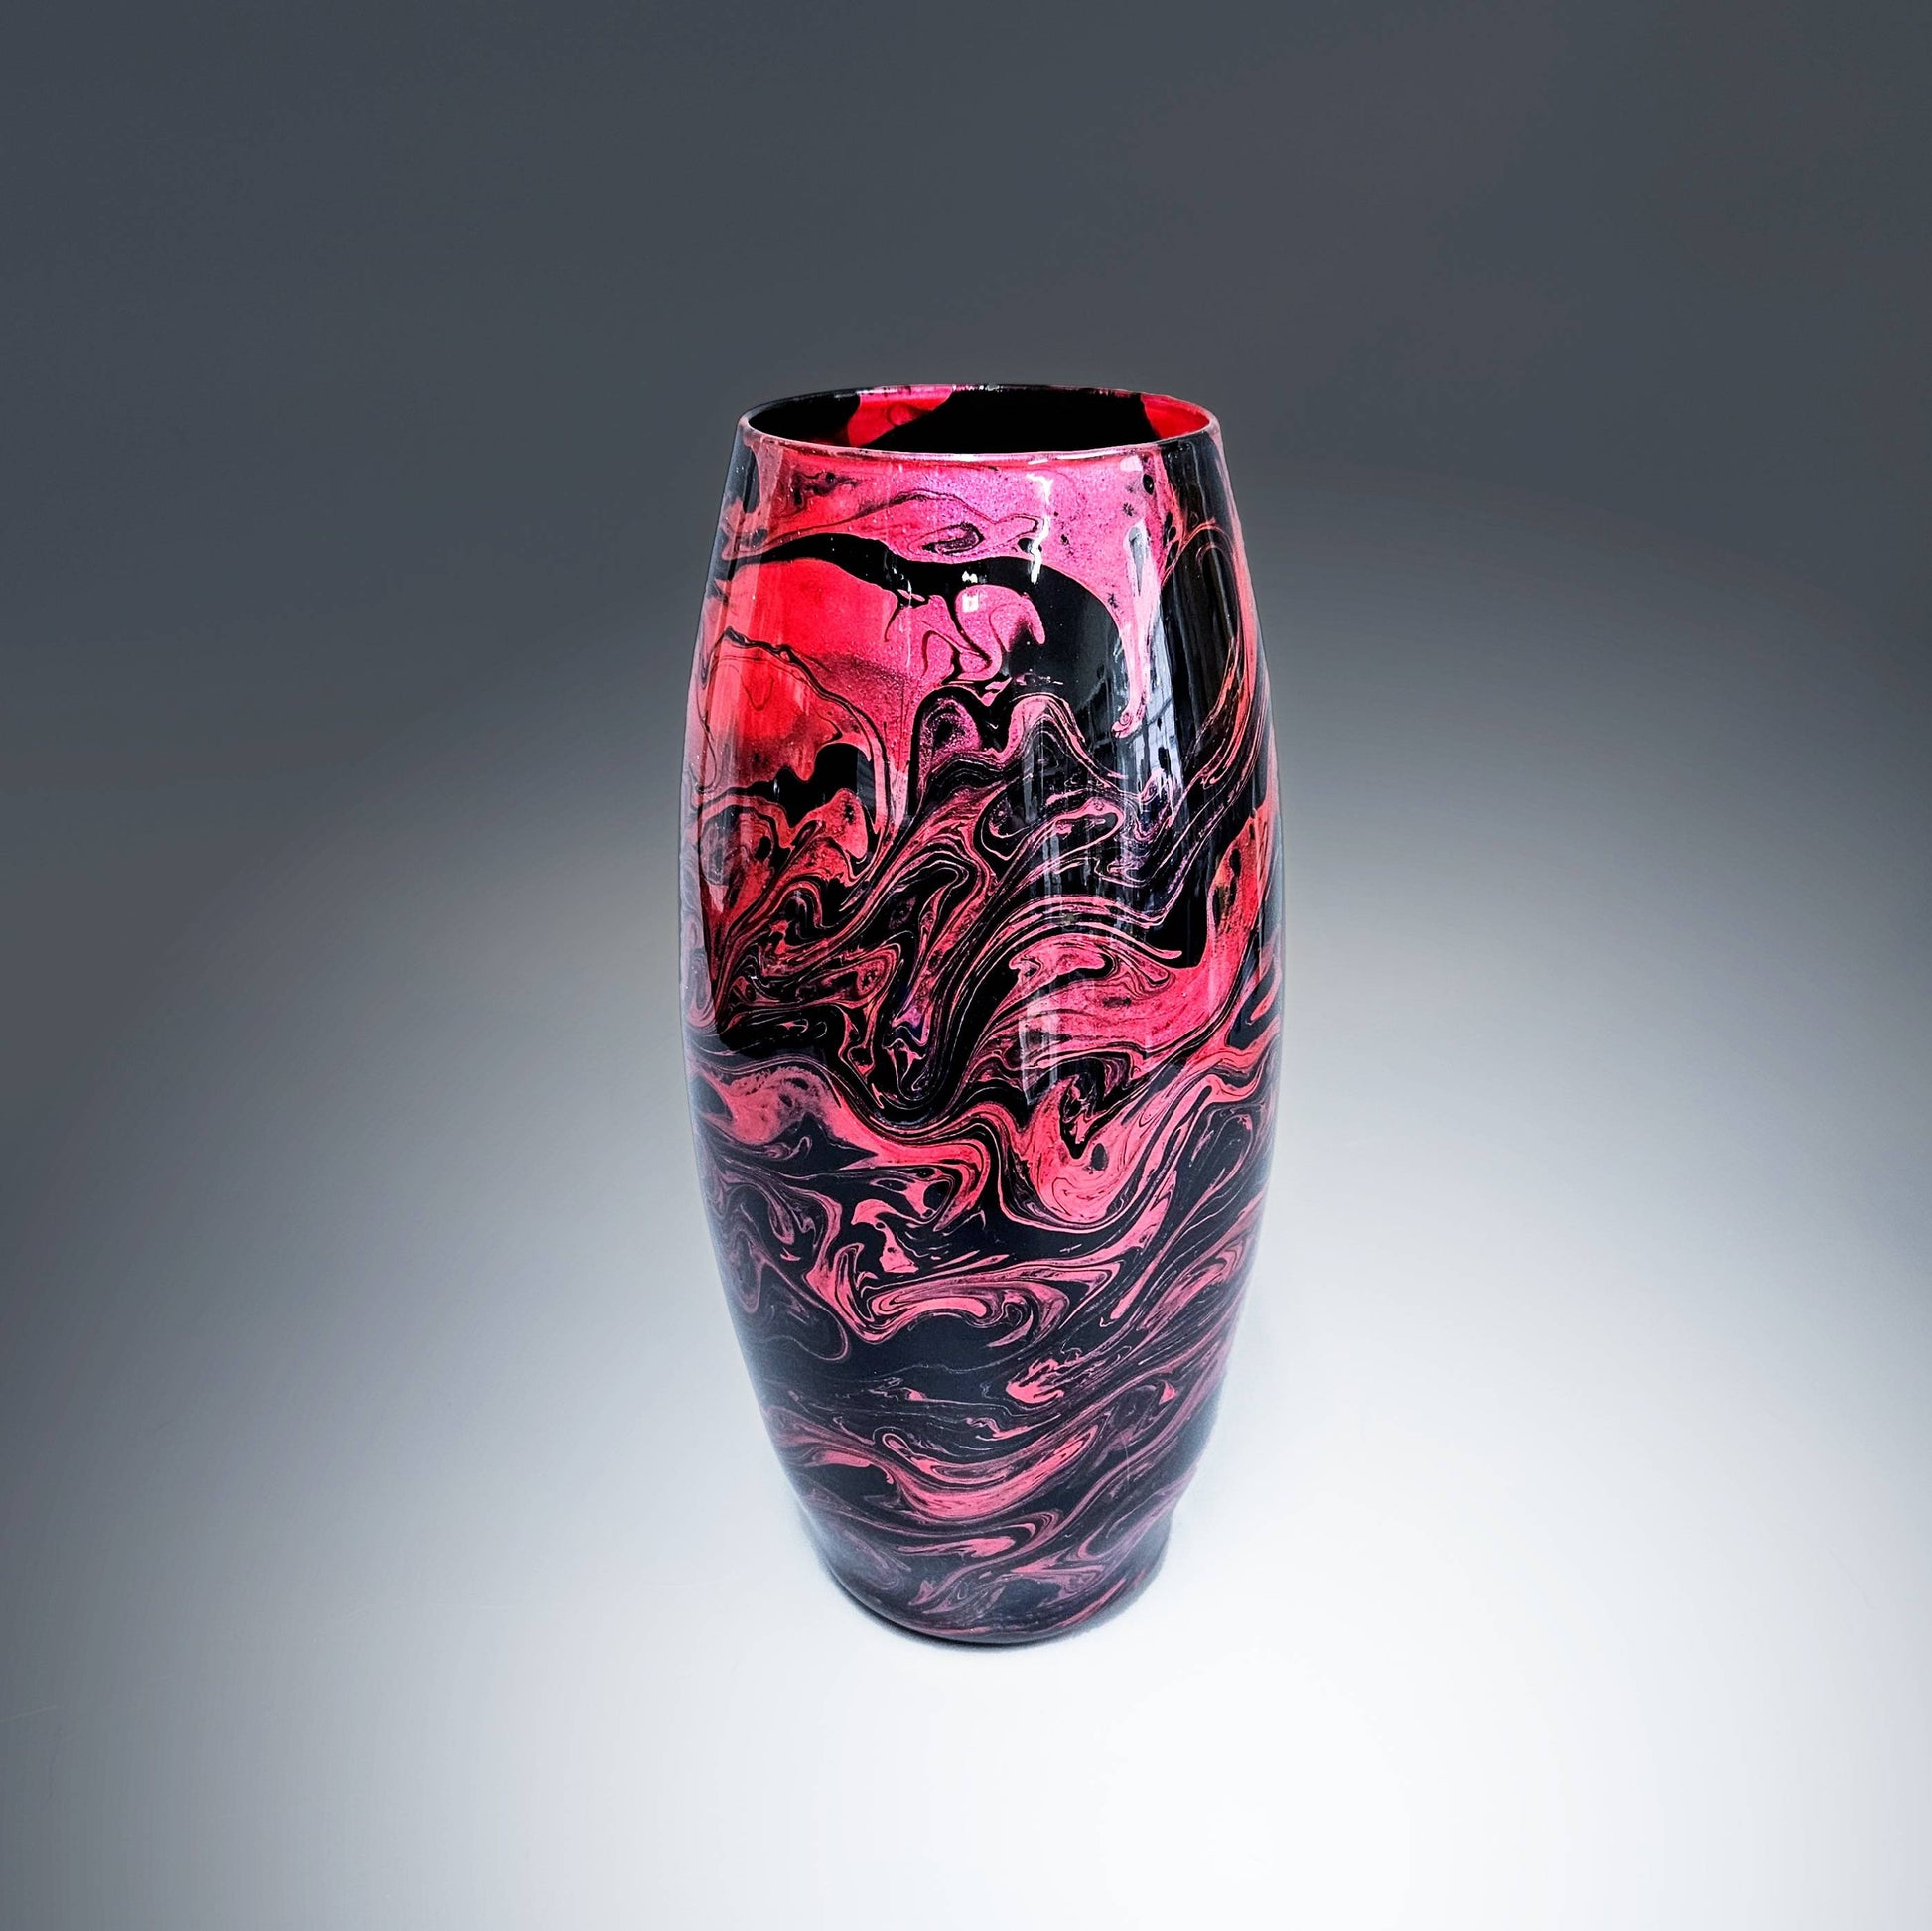 This hand-painted, fluid art, modern glass vase is an electric display of vibrant colors swirling together in an elegant dance of metallic rose red on a base of glossy black. The fluidity of the design creates a captivating and unique pattern,